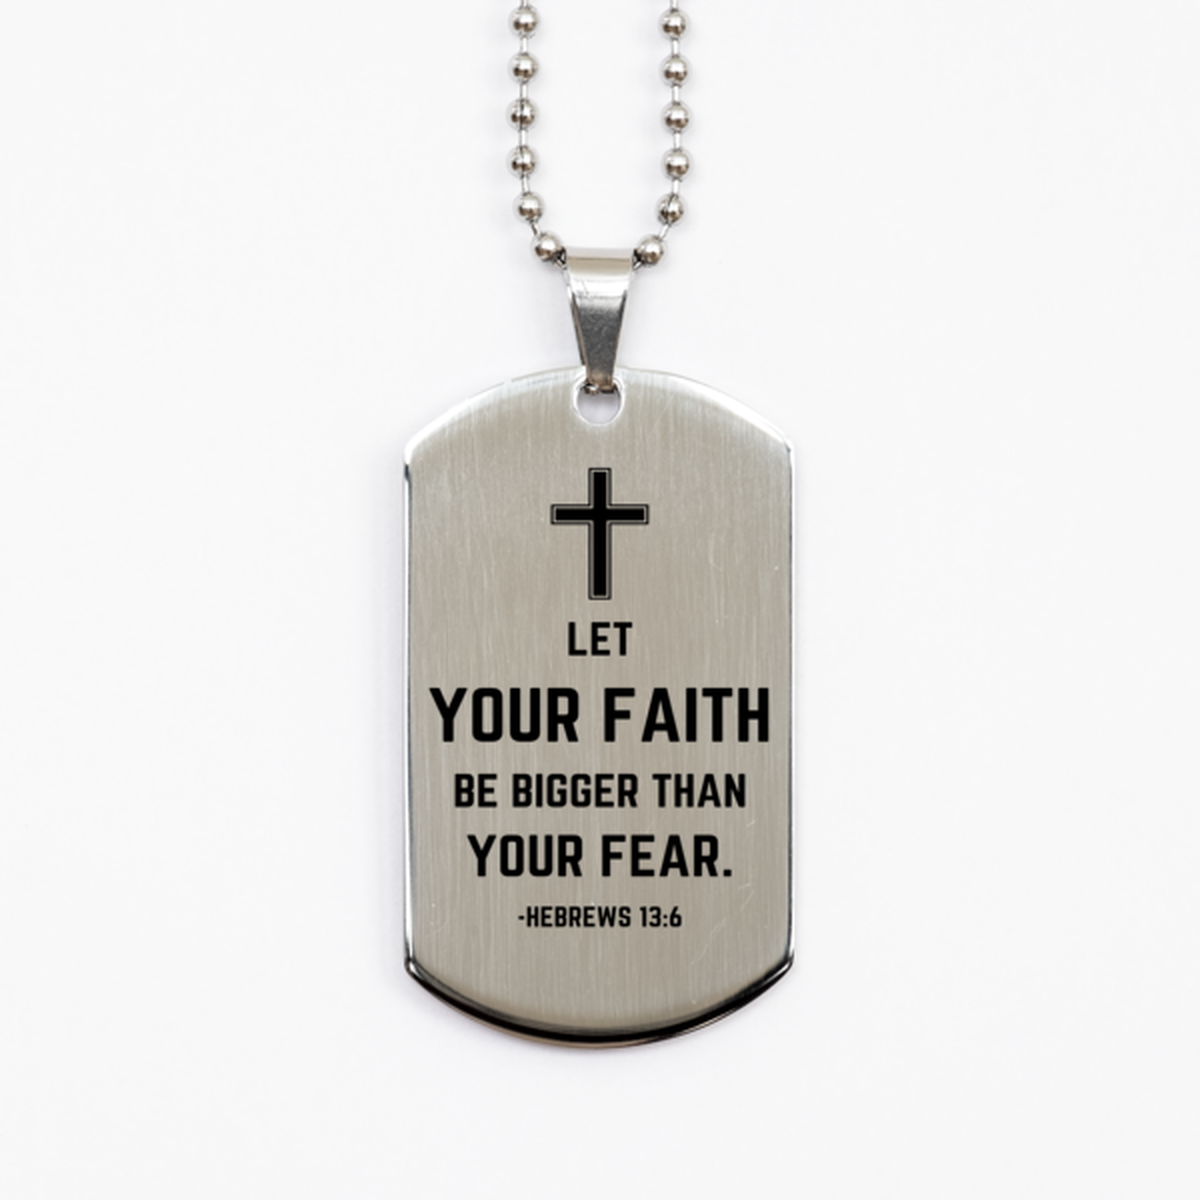 Baptism Gifts For Teenage Boys Girls, Christian Bible Verse Silver Dog Tag, Let your faith be bigger than your fear, Confirmation Gifts, Bible Verse Necklace for Son, Godson, Grandson, Nephew